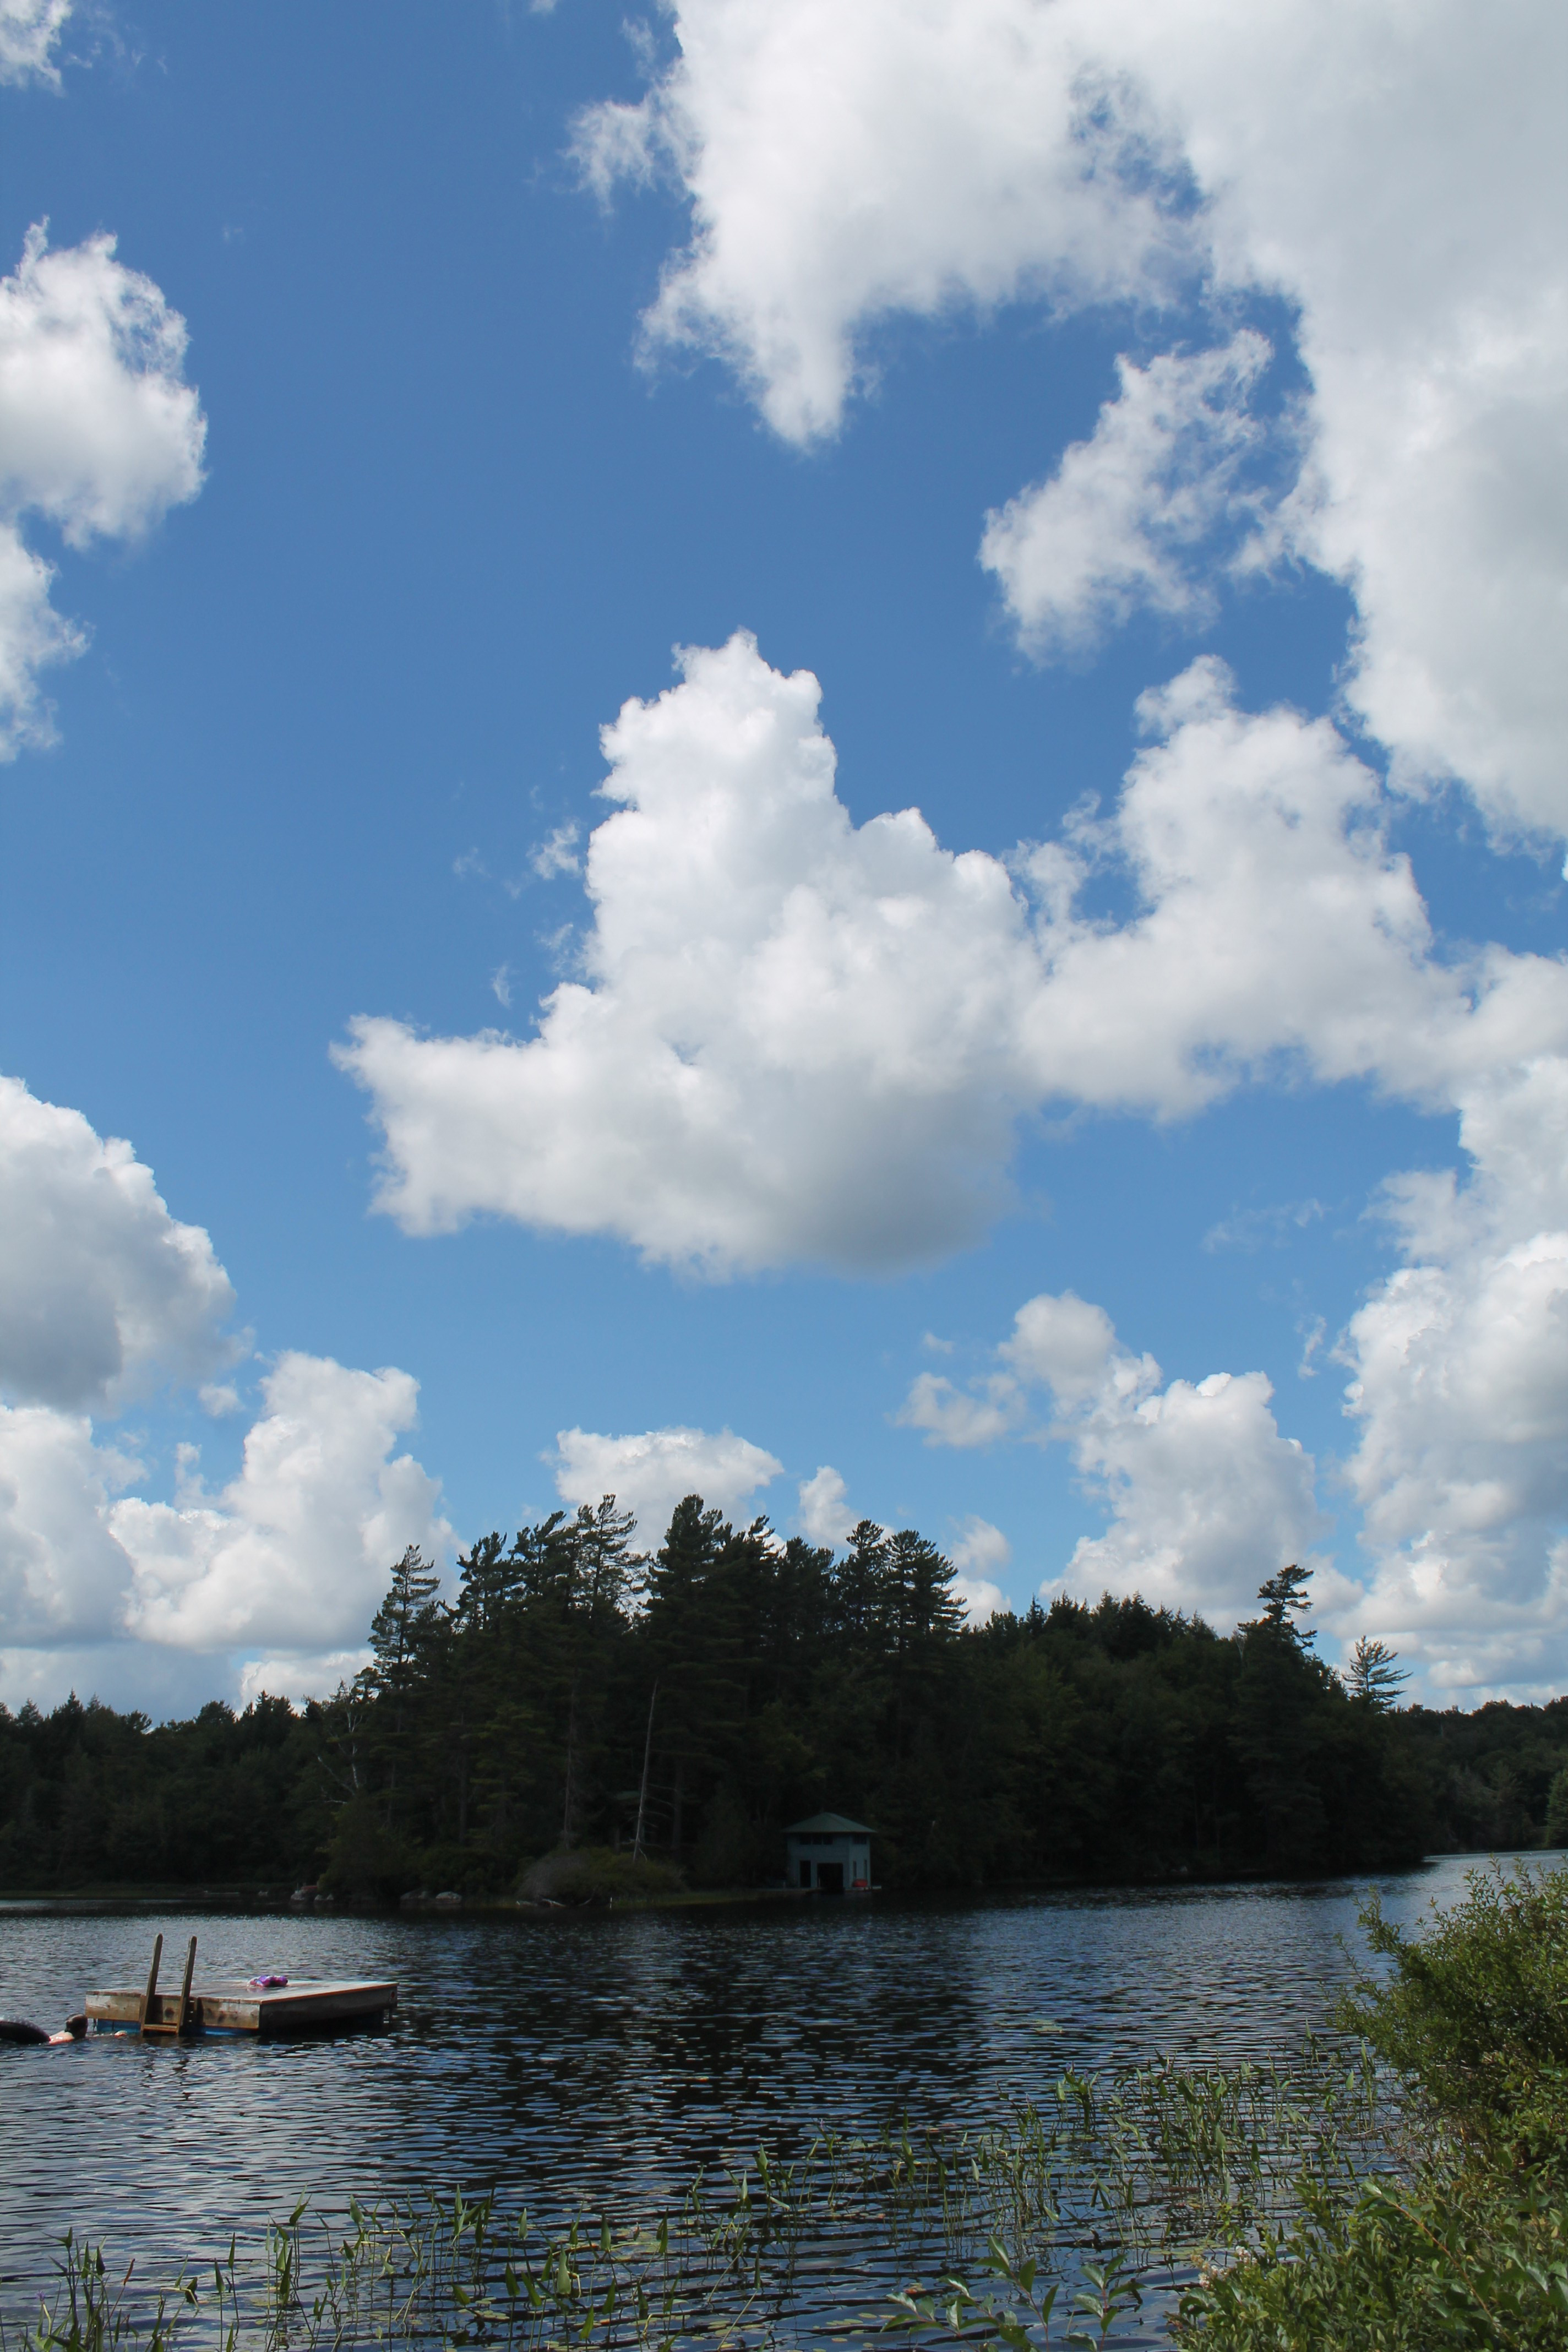 clouds in a sunny summer sky over a northern lake